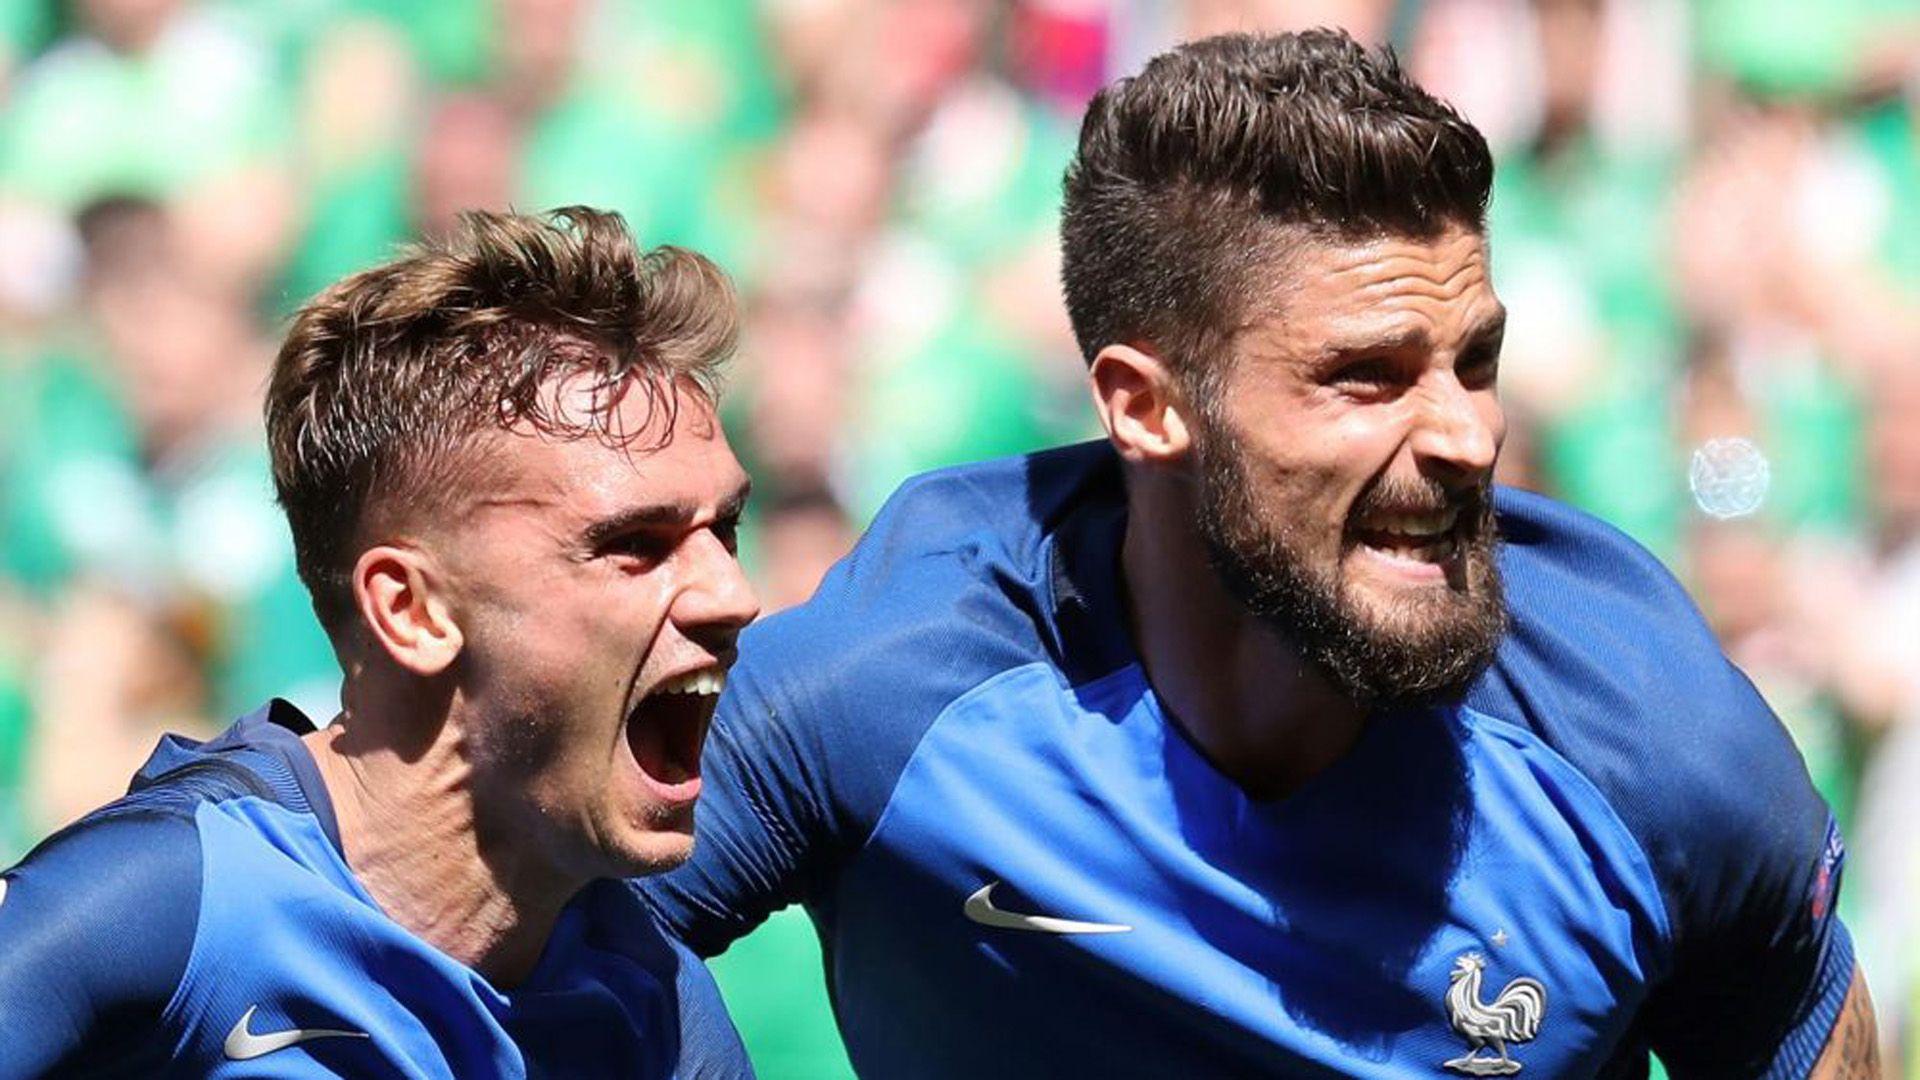 Antoine Griezmann And Giroud France Players HD Wallpaper